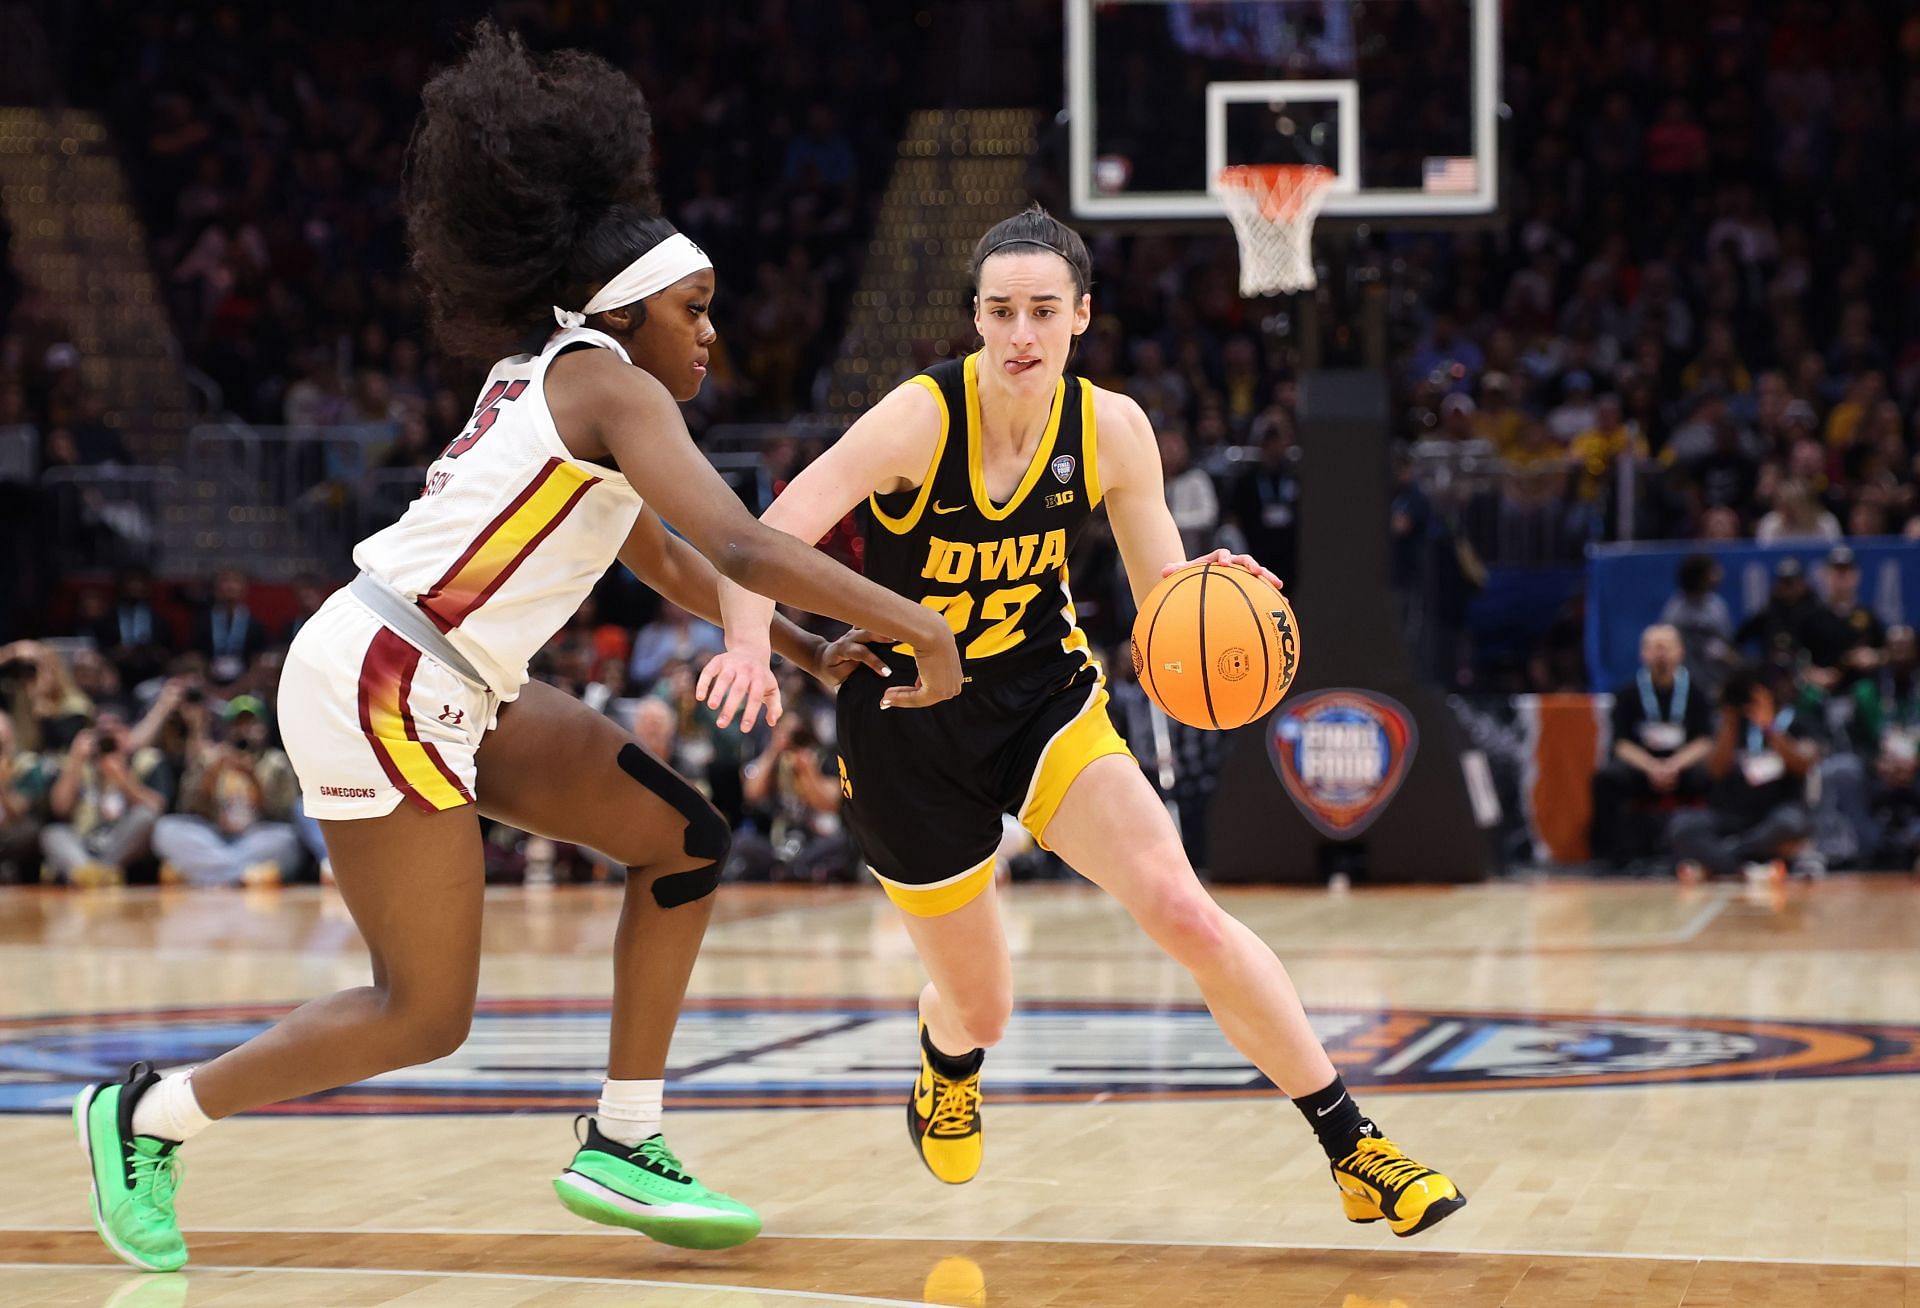 Clark averaged 31.6 points, 8.9 rebounds, 7.4 assists and 1.7 steals in her last season with Iowa.